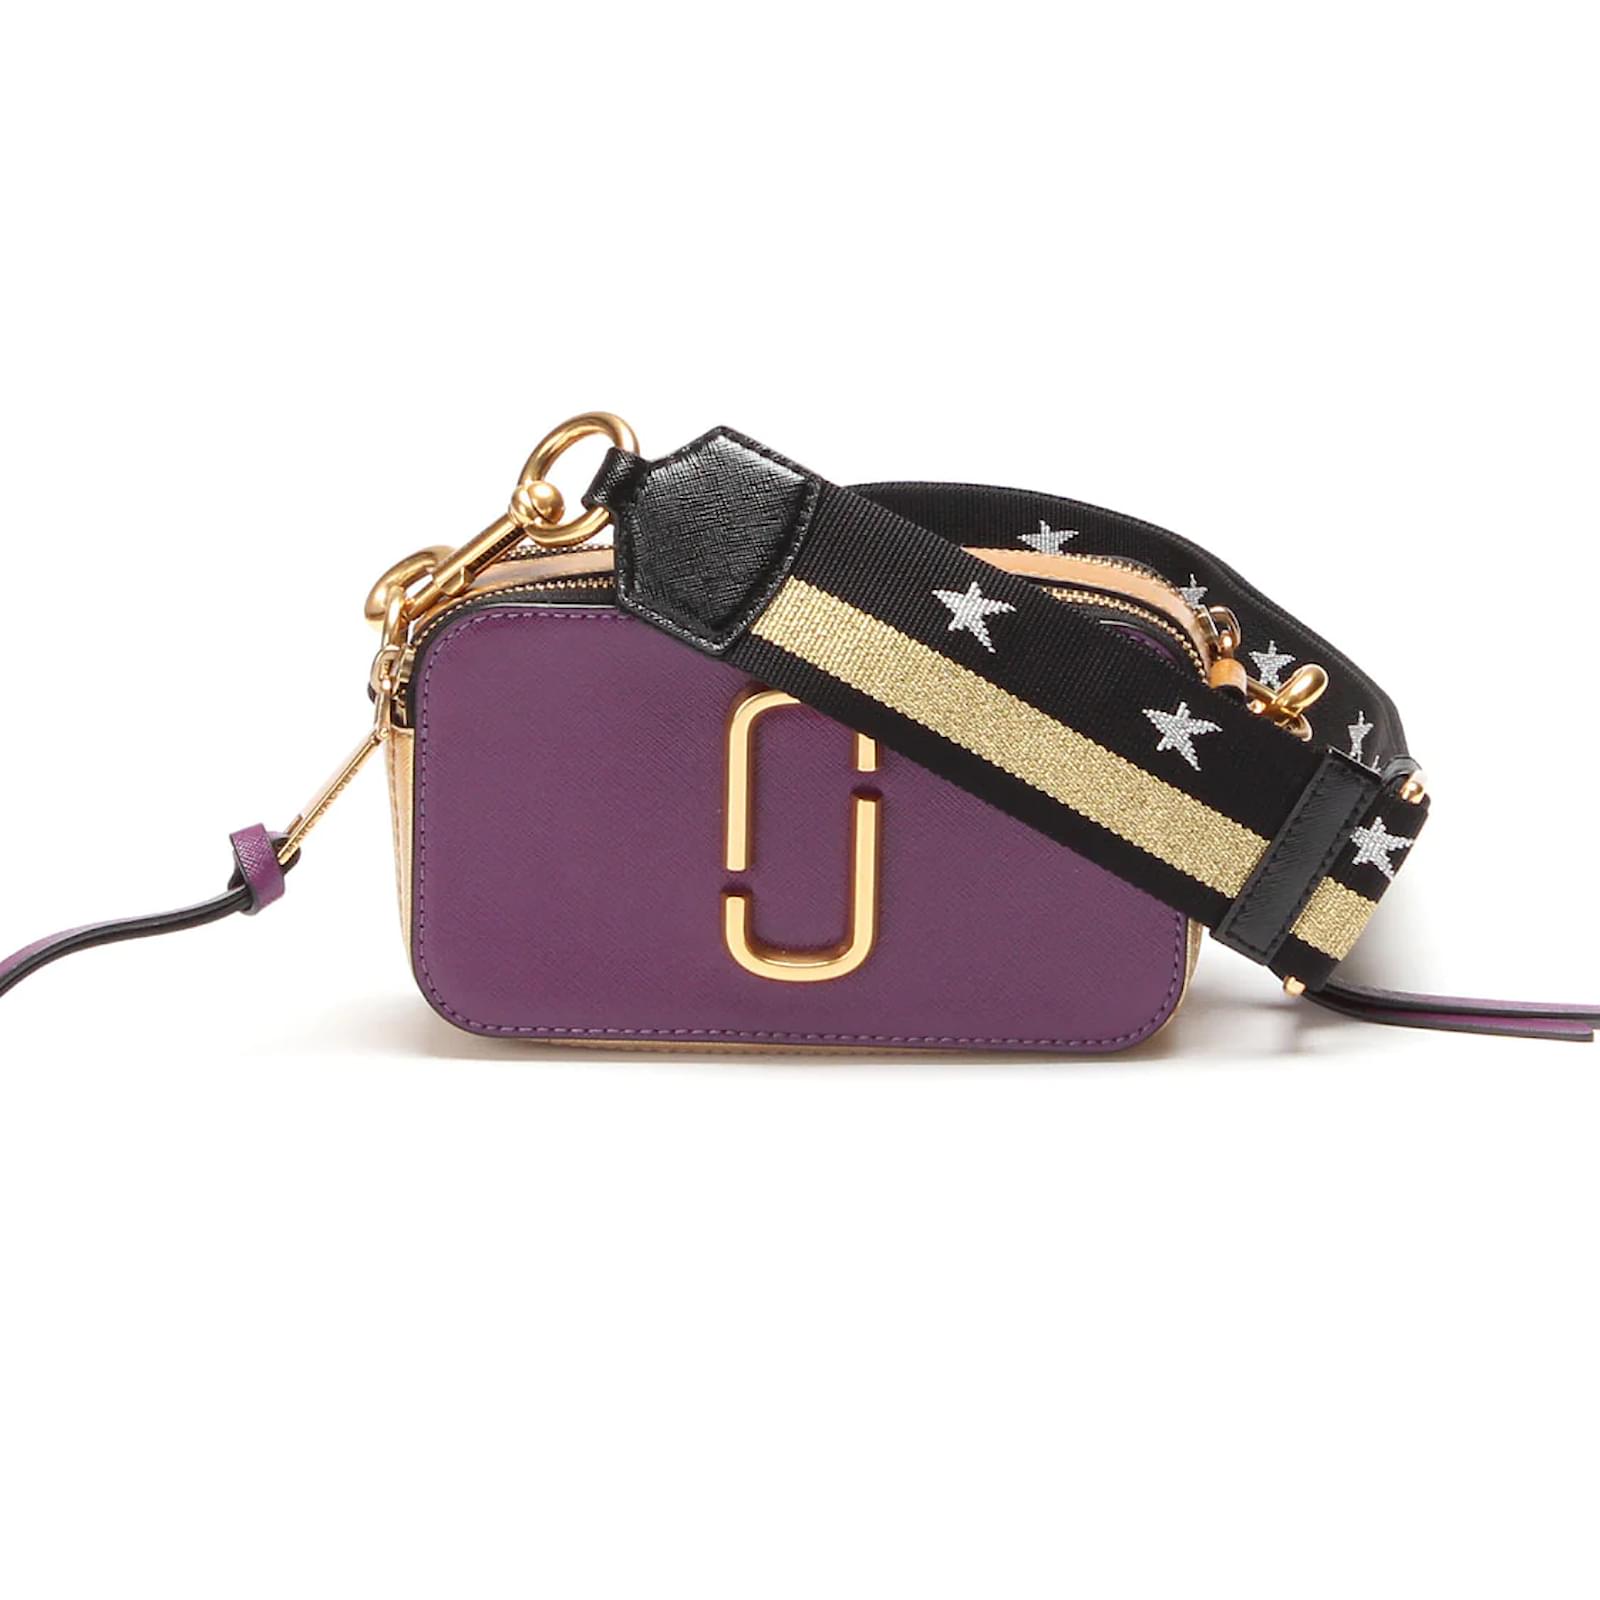 MARC JACOBS SNAPSHOT BAG IN PURPLE LEATHER